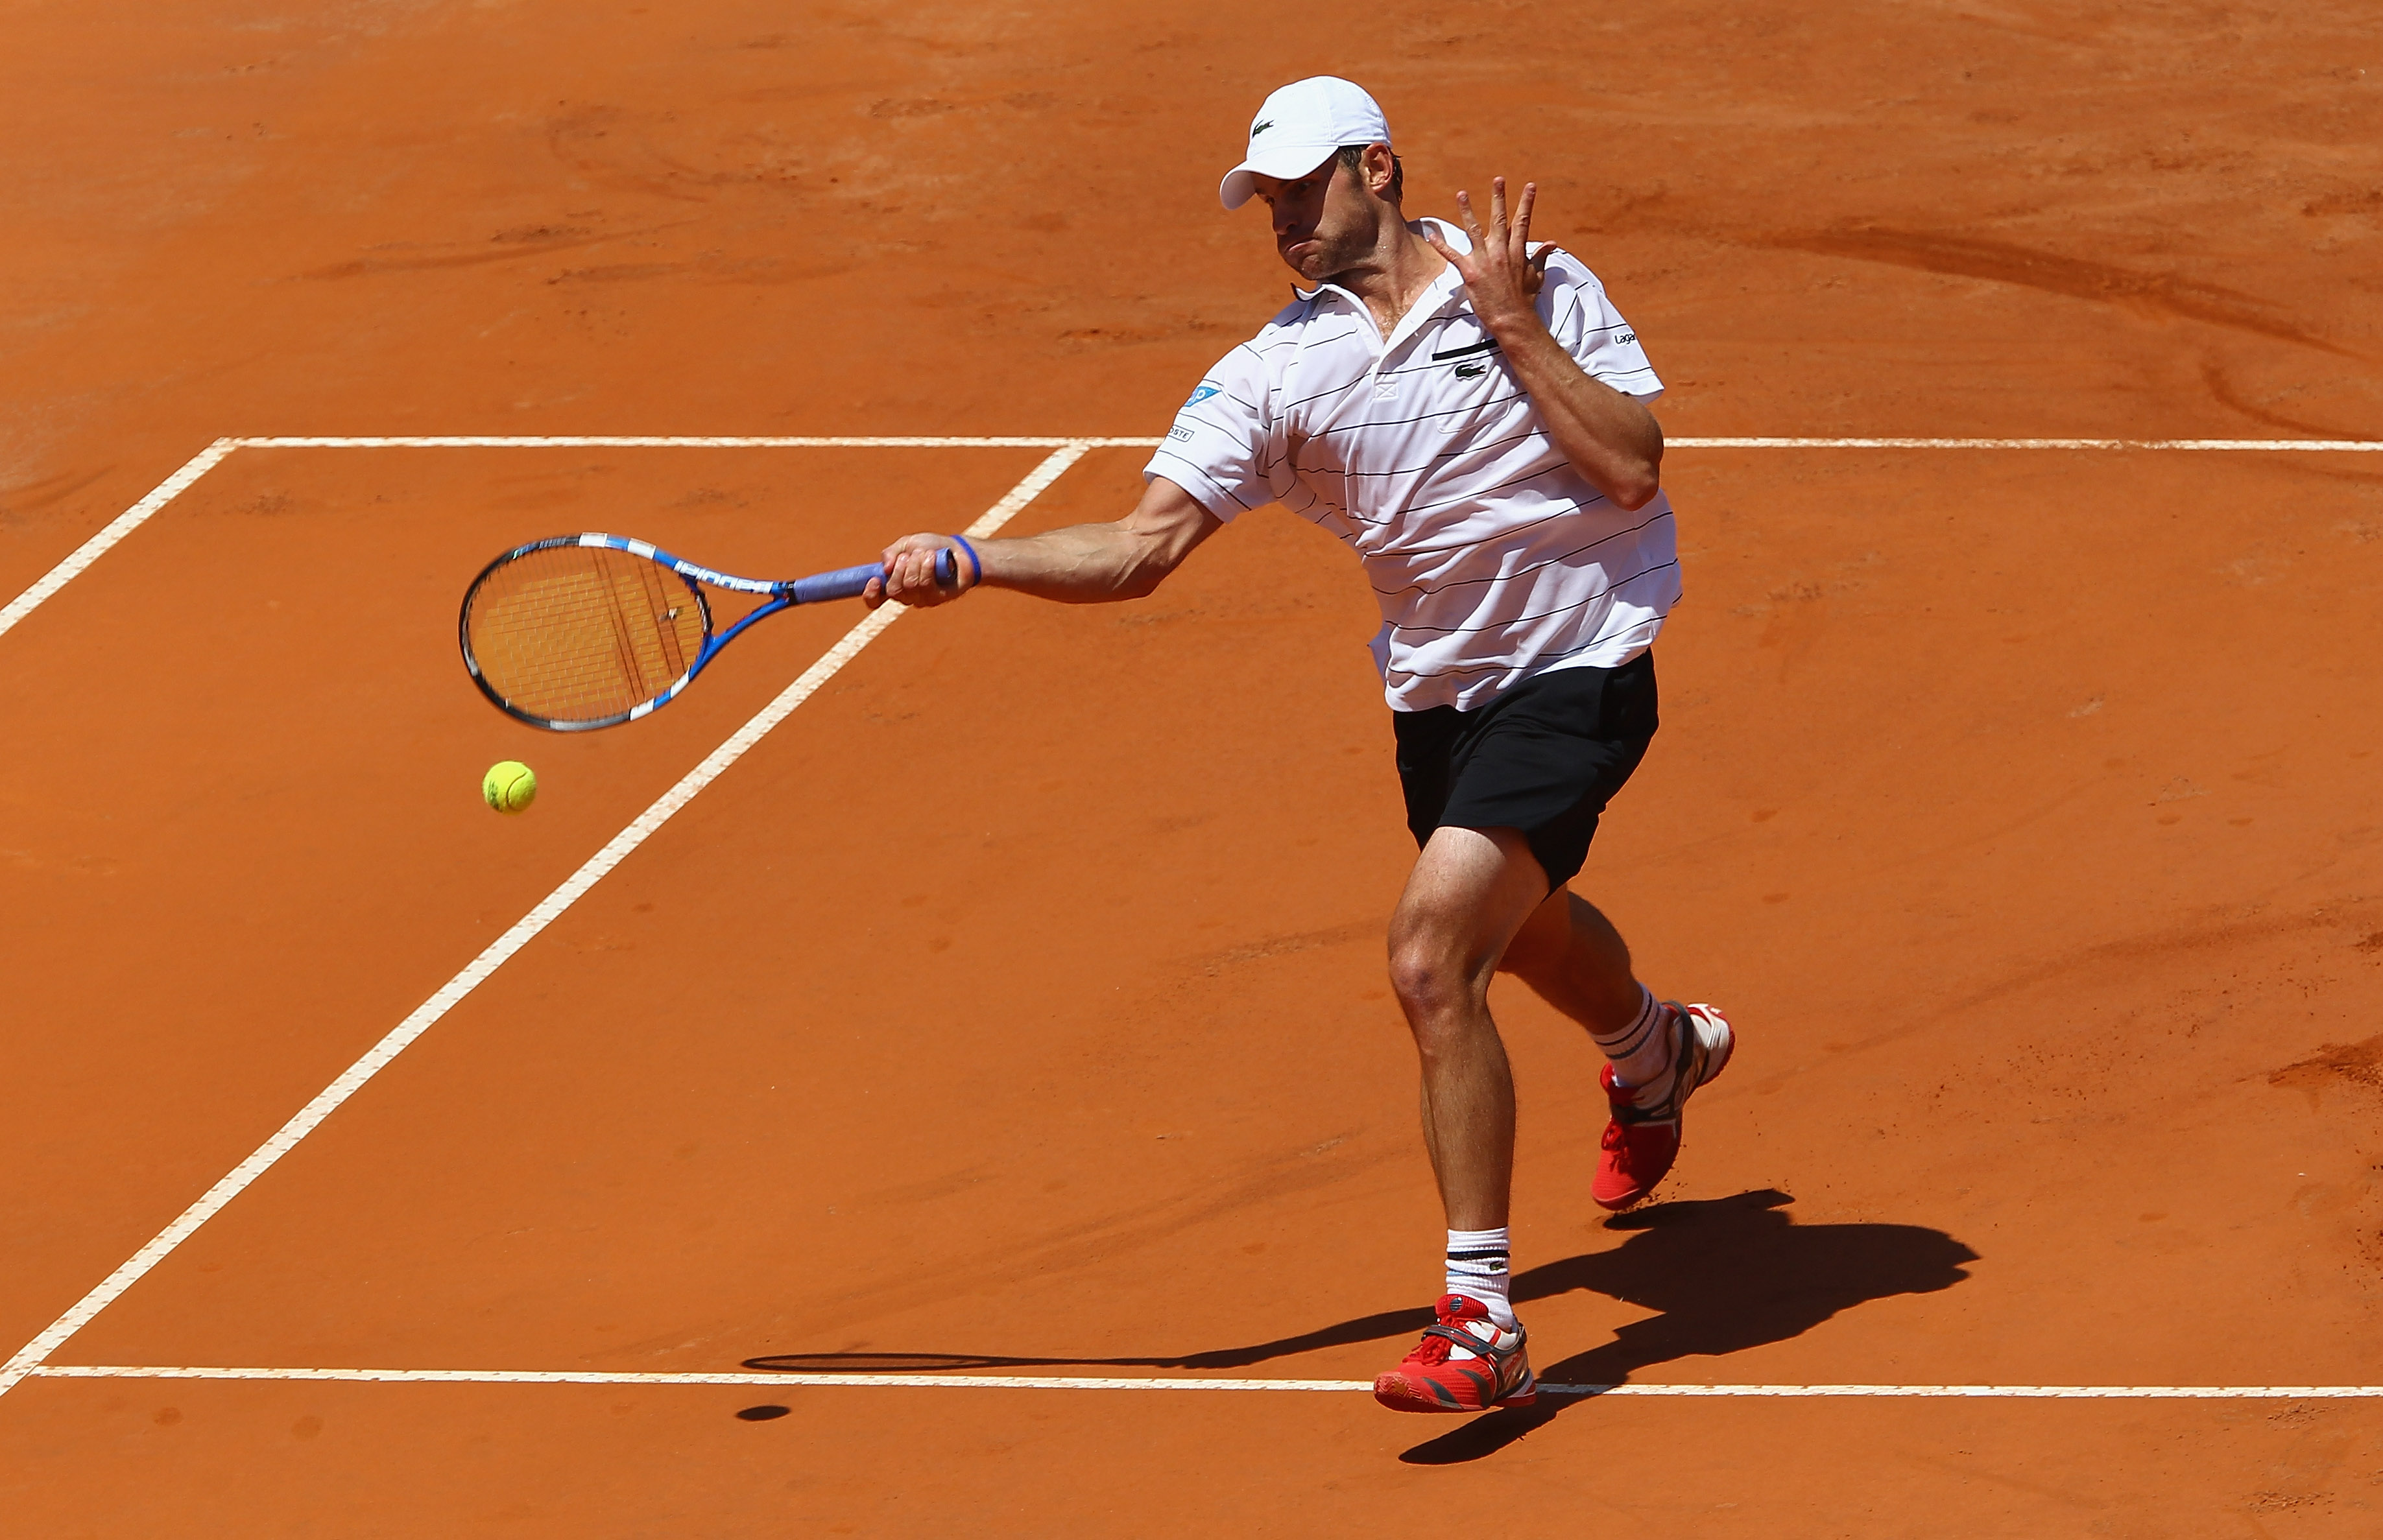 ROME, ITALY - MAY 09:  Andy Roddick of the USA plays a forehand during his first round match against Gilles Simon of France during day two of the Internazoinali BNL D'Italia at the Foro Italico Tennis Centre on May 9, 2011 in Rome, Italy.  (Photo by Clive